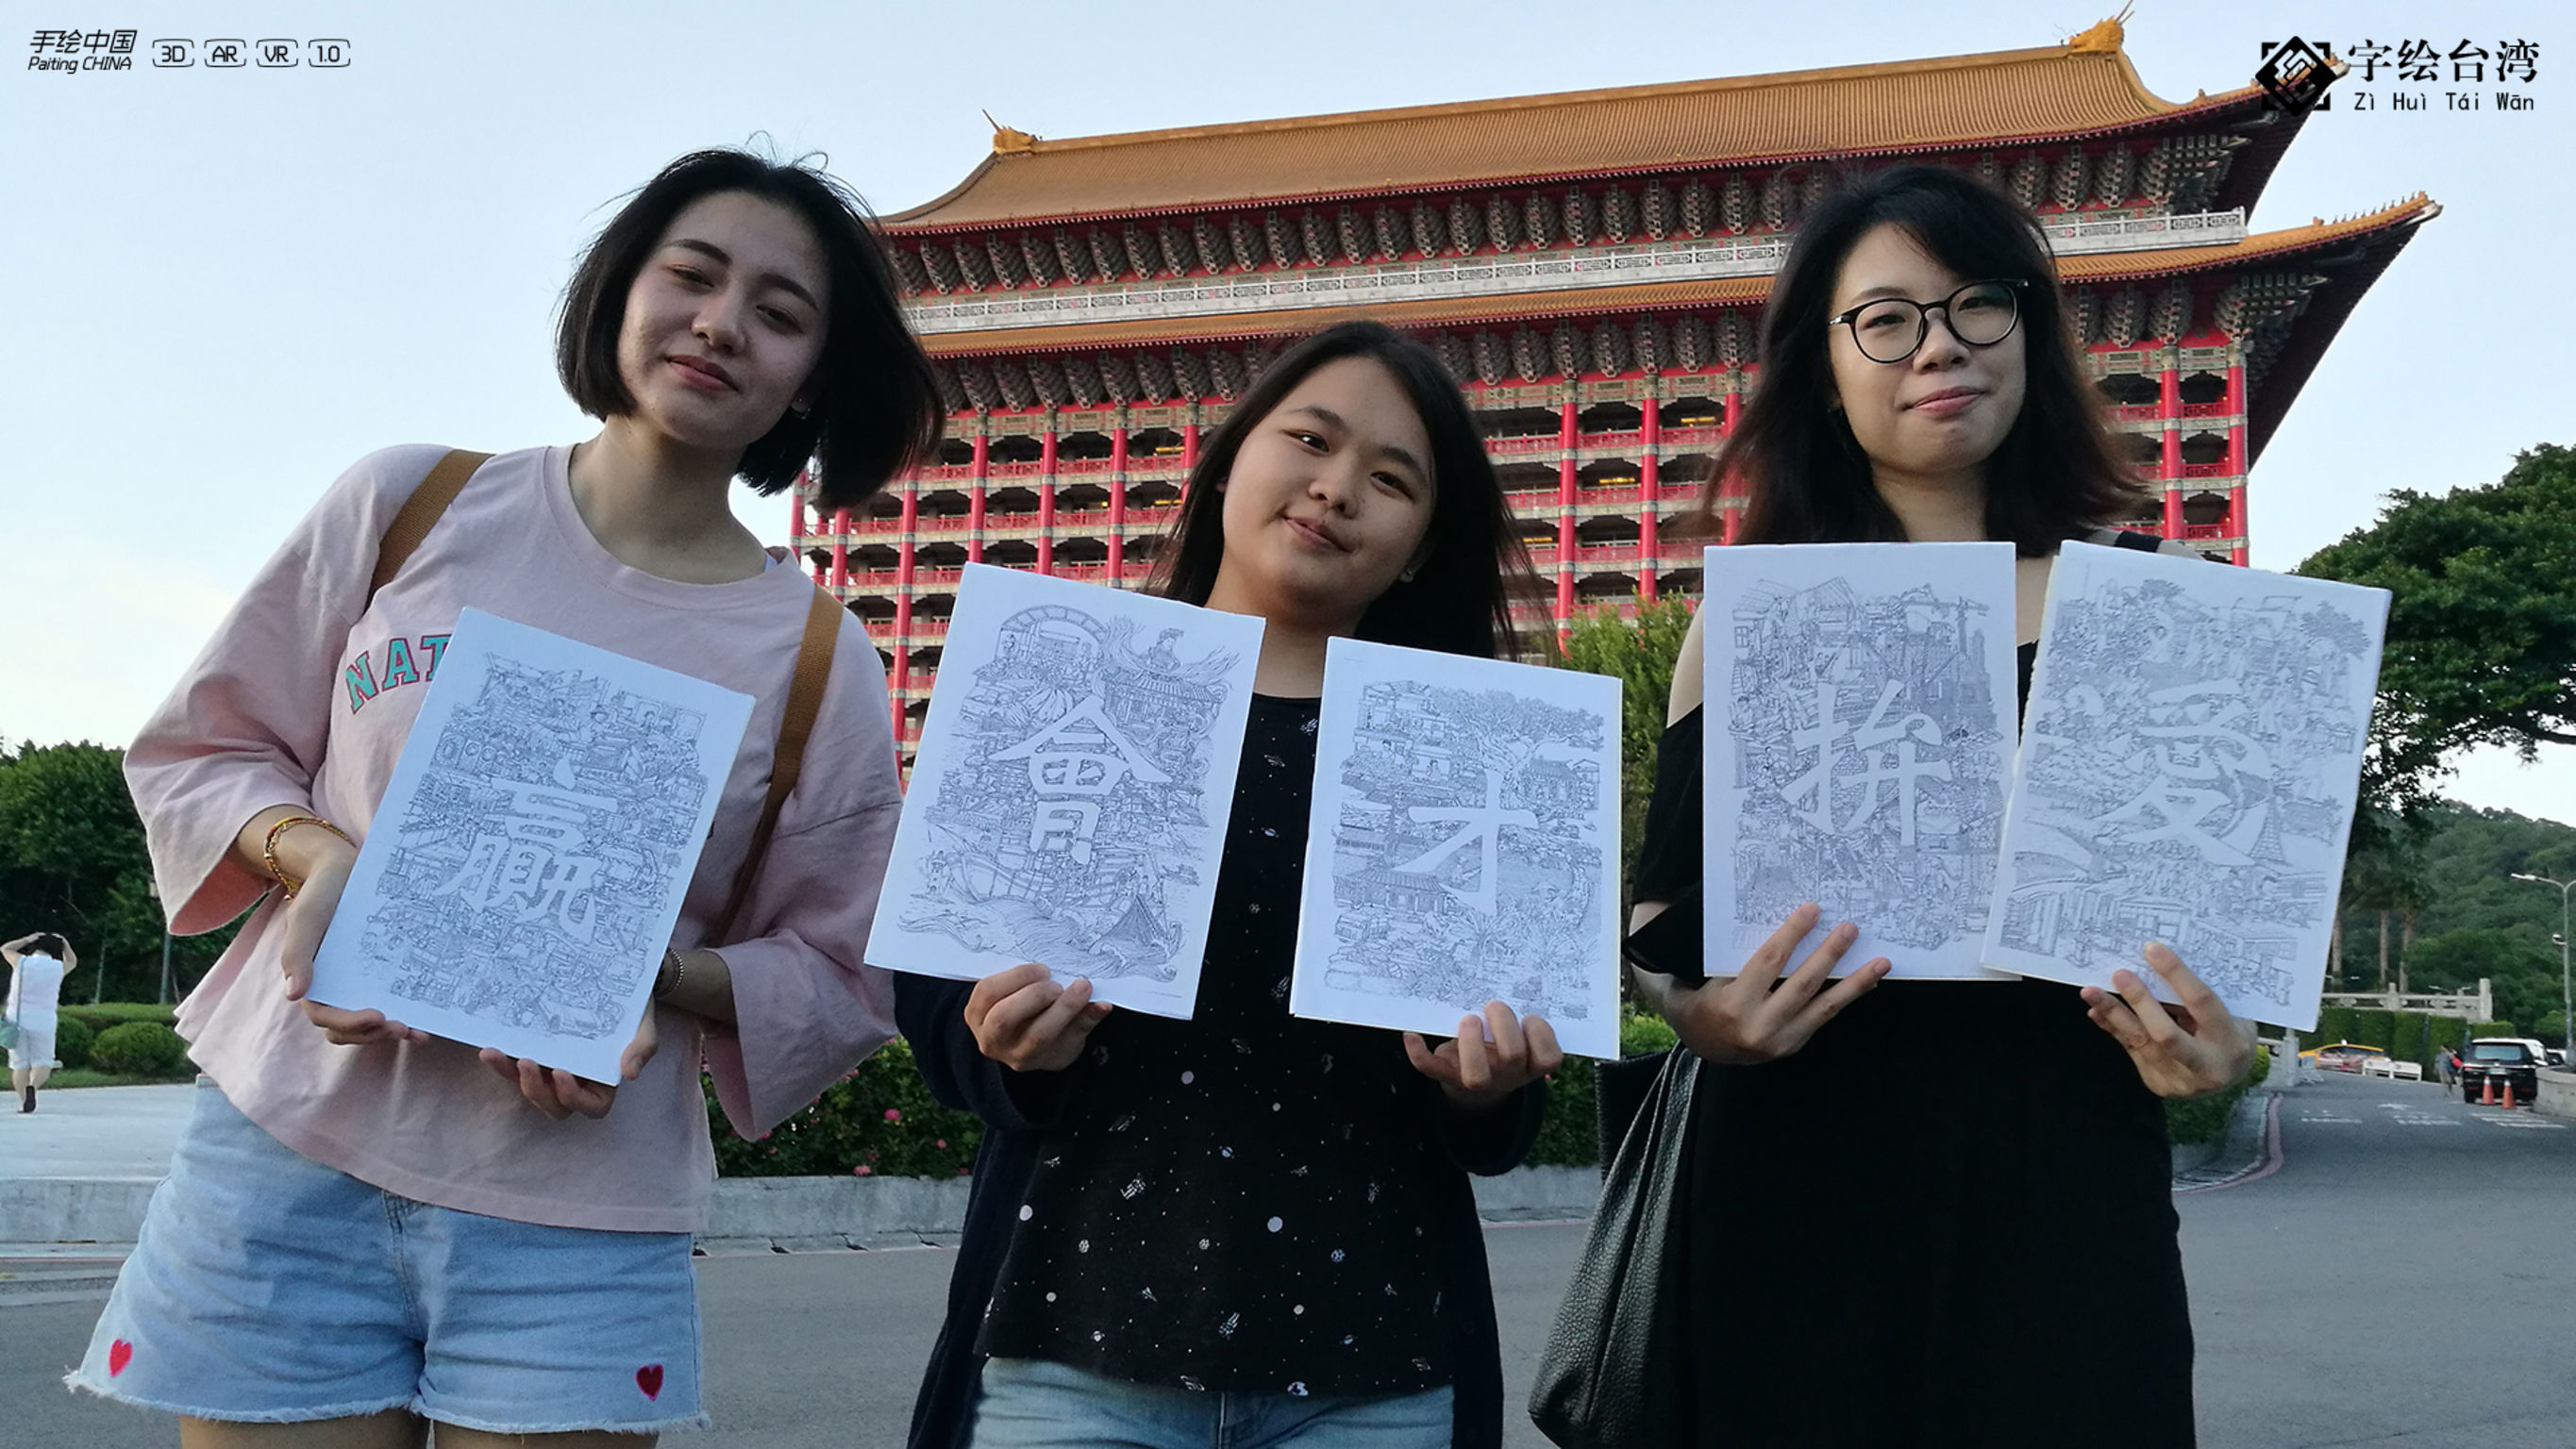 Hand-Drawn China series: Taiwan in Chinese  Characters